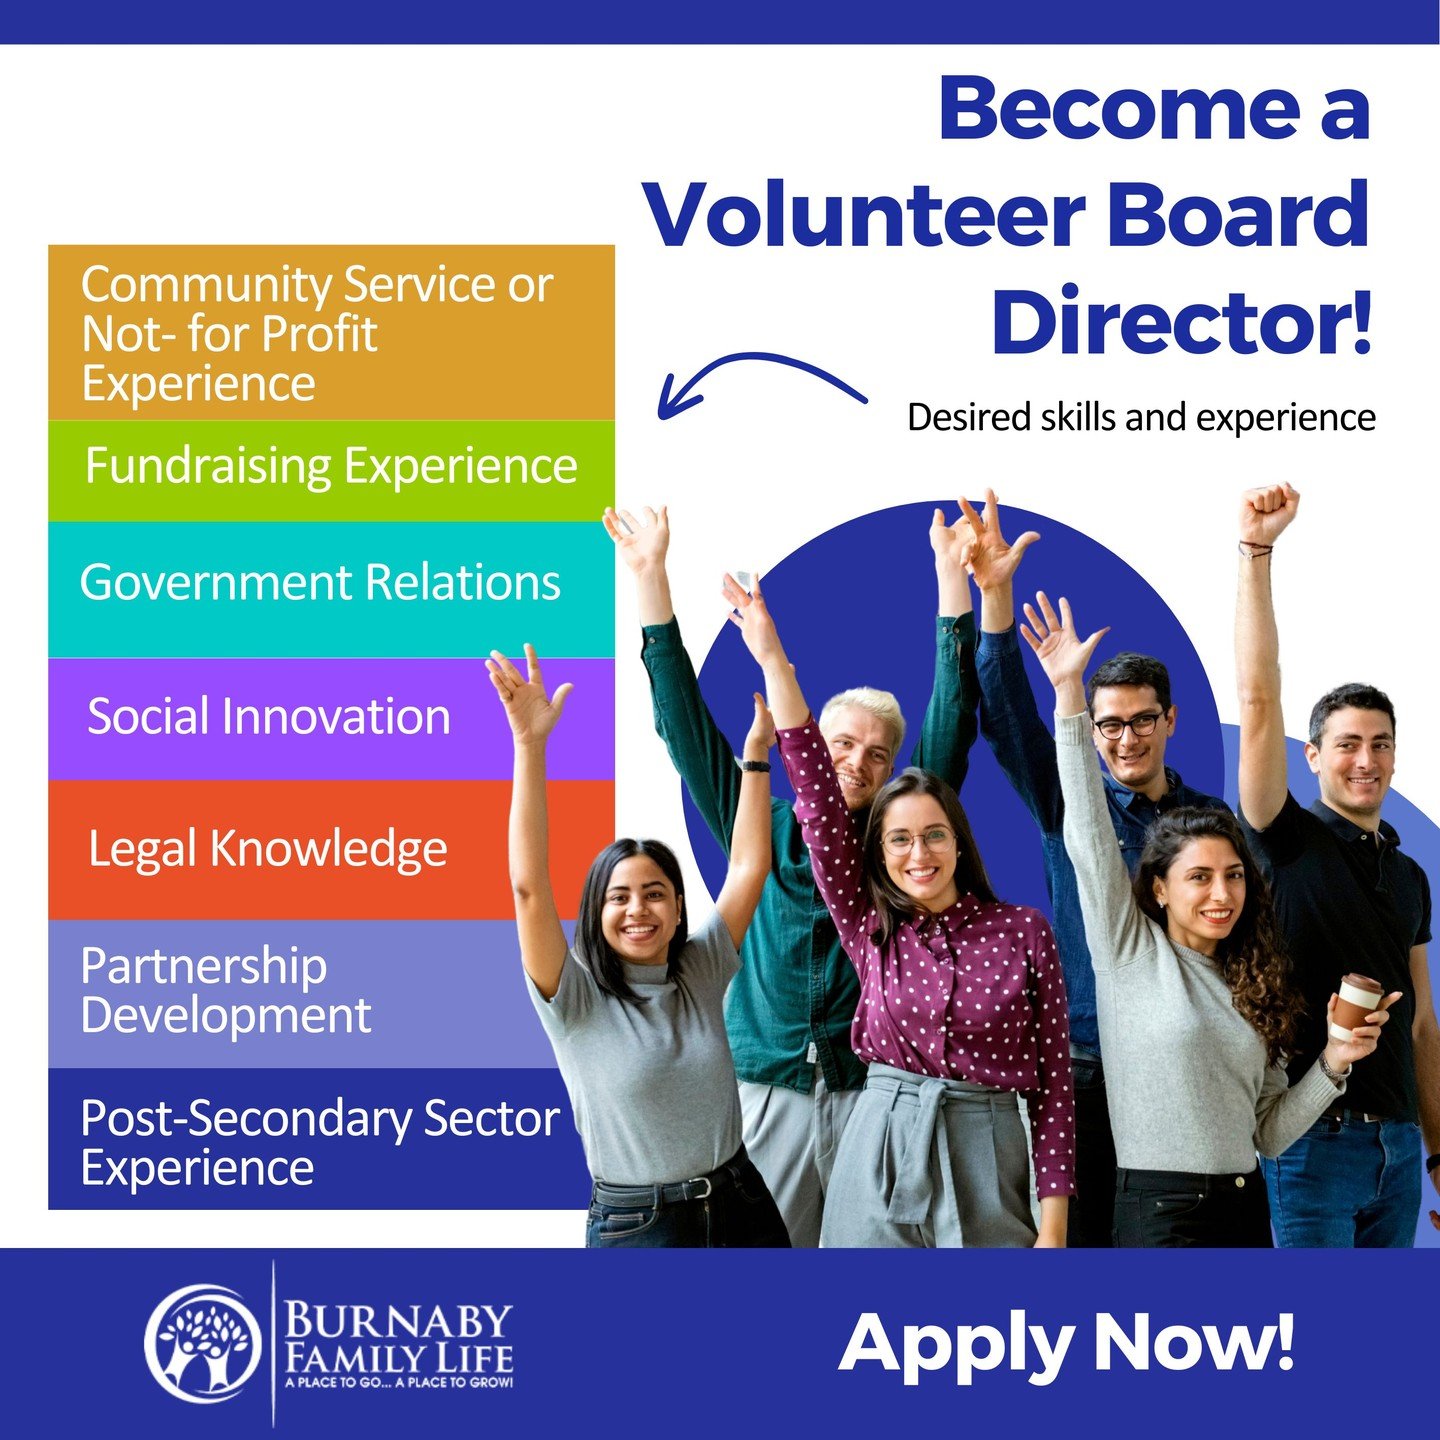 🌟 Join Our Board of Directors Team! 

Are you passionate about making a difference in your community? Burnaby Family Life is looking for dedicated individuals to join our Board of Directors! As a nonprofit organization committed to supporting famili